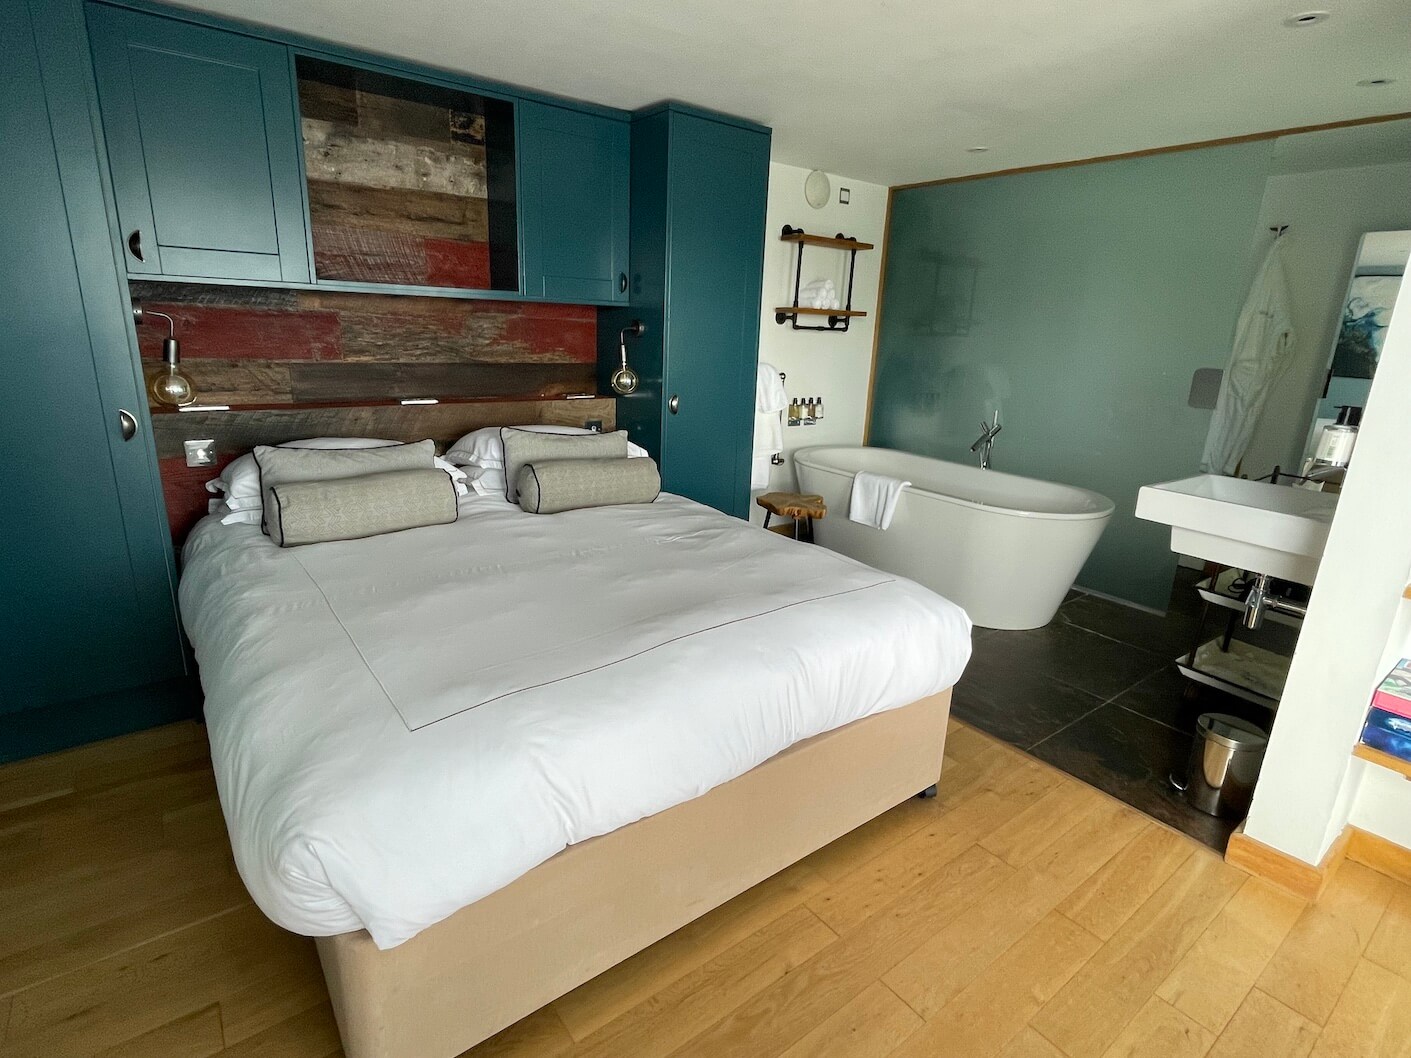 The romantic open-plan bedroom at Agatha's Beach House at Burgh Island